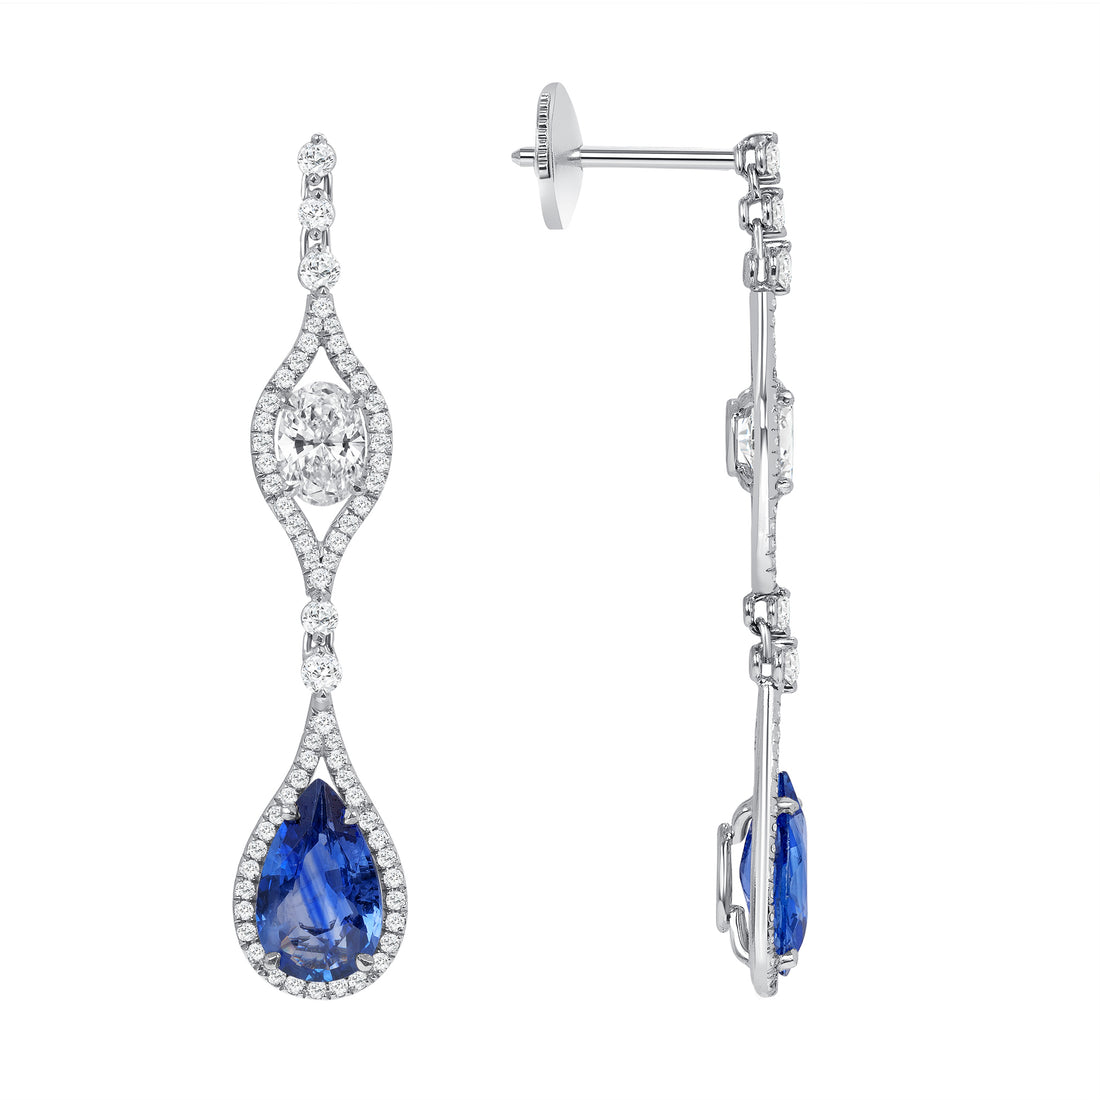 Round Brilliant Melee and Oval Diamond and Pear Shape Sapphire Drop Earrings